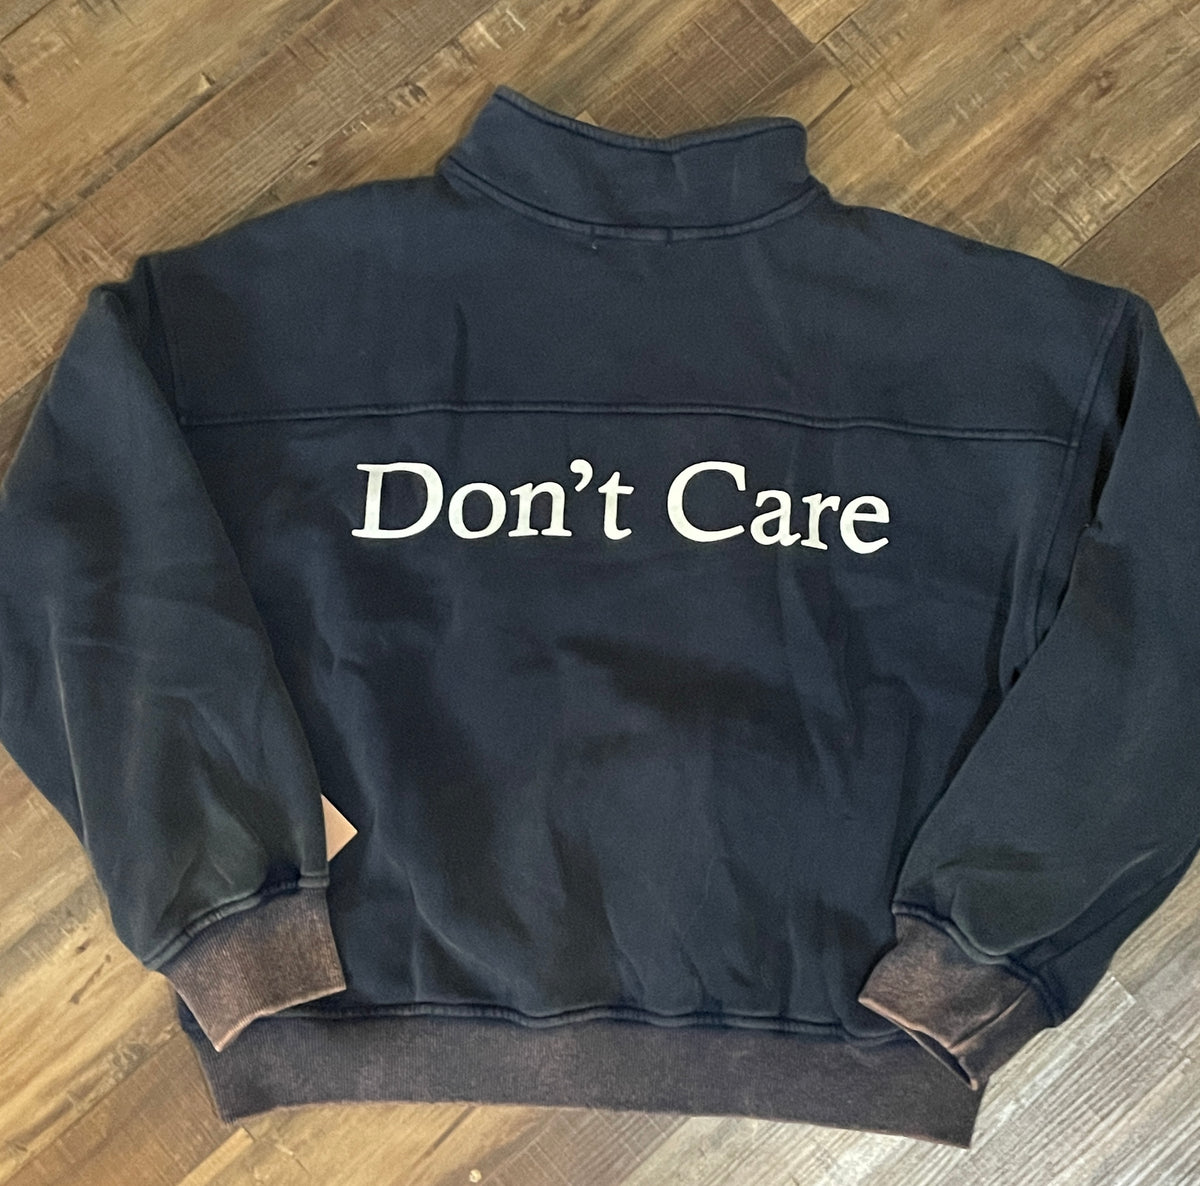 The Wavy Navy Don’t Know, Don’t Care sweatshirt